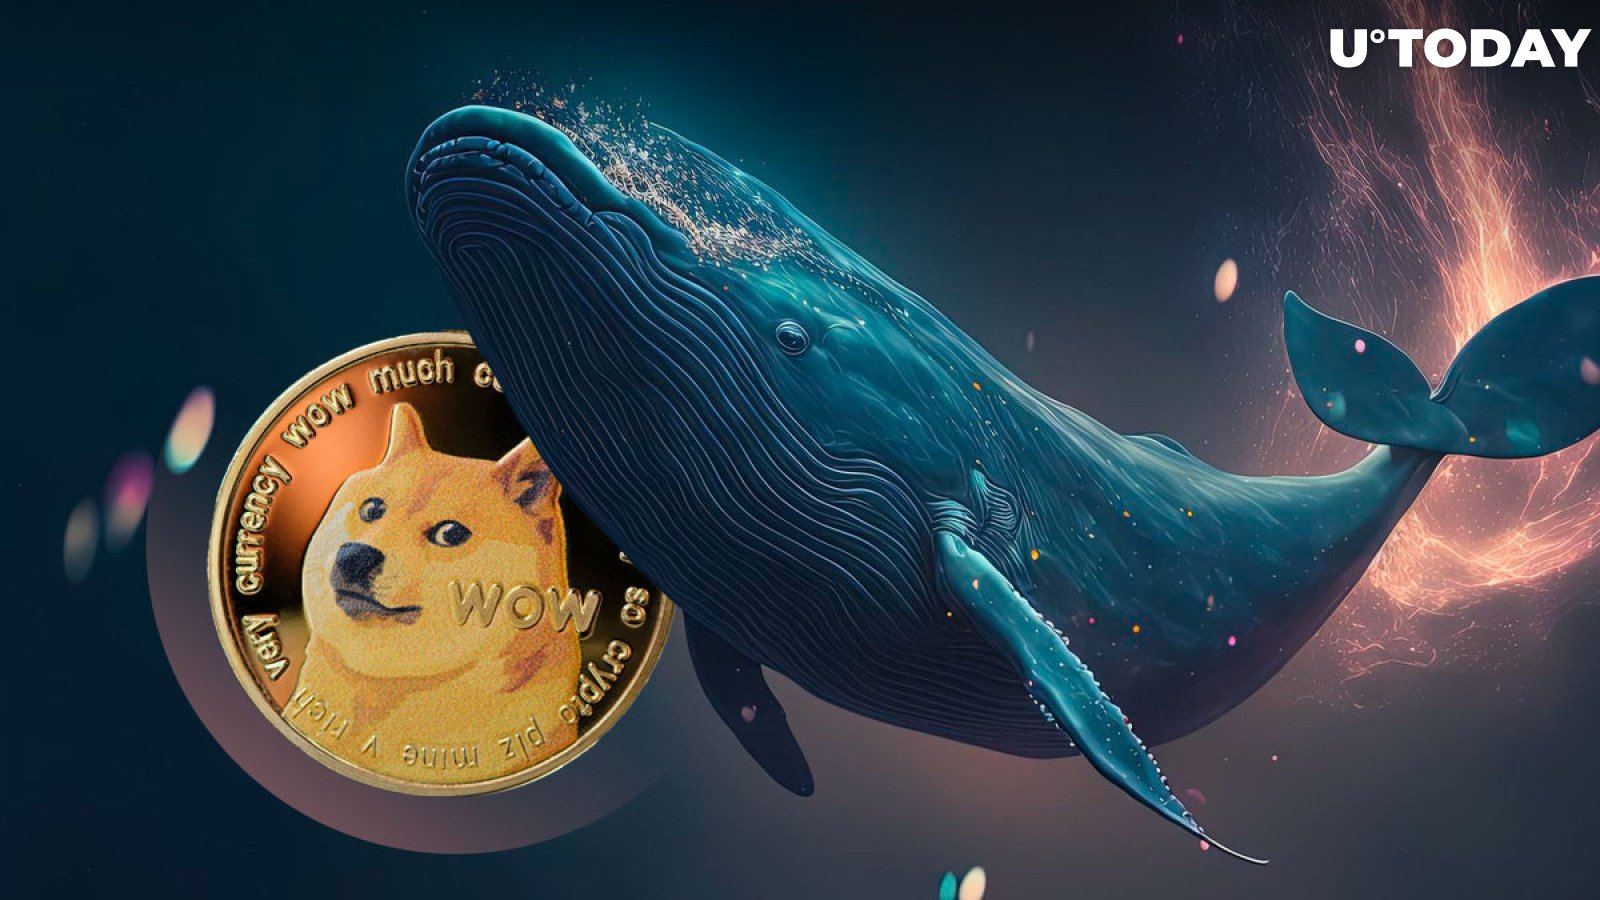 Whale Suddenly Unloads 86 Million DOGE, Sending Dogecoin Price into Freefall